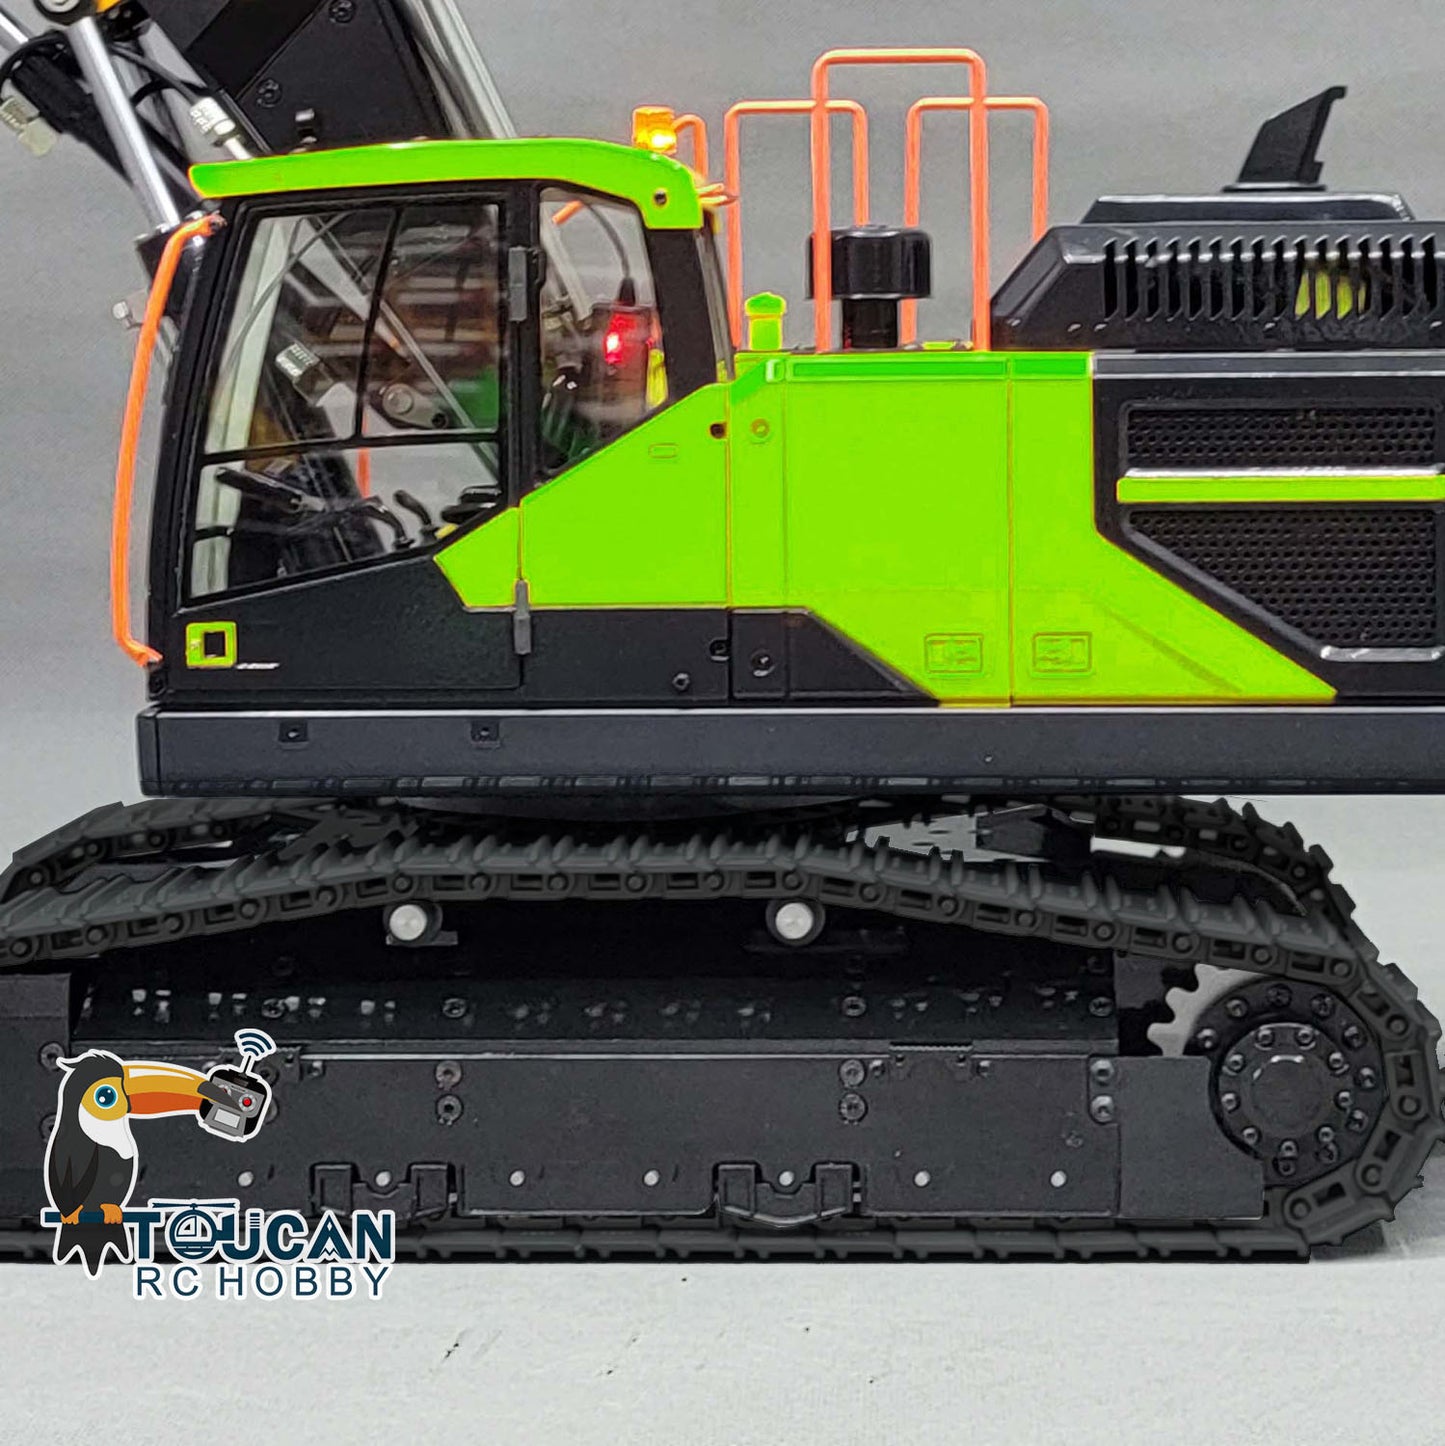 IN STOCK 1:14 MTMODEL EC380 Metal 3 Arms Hydraulic Tracked Excavator Assembled and Painted RC Construction Vehicle Heavy Digger Machine